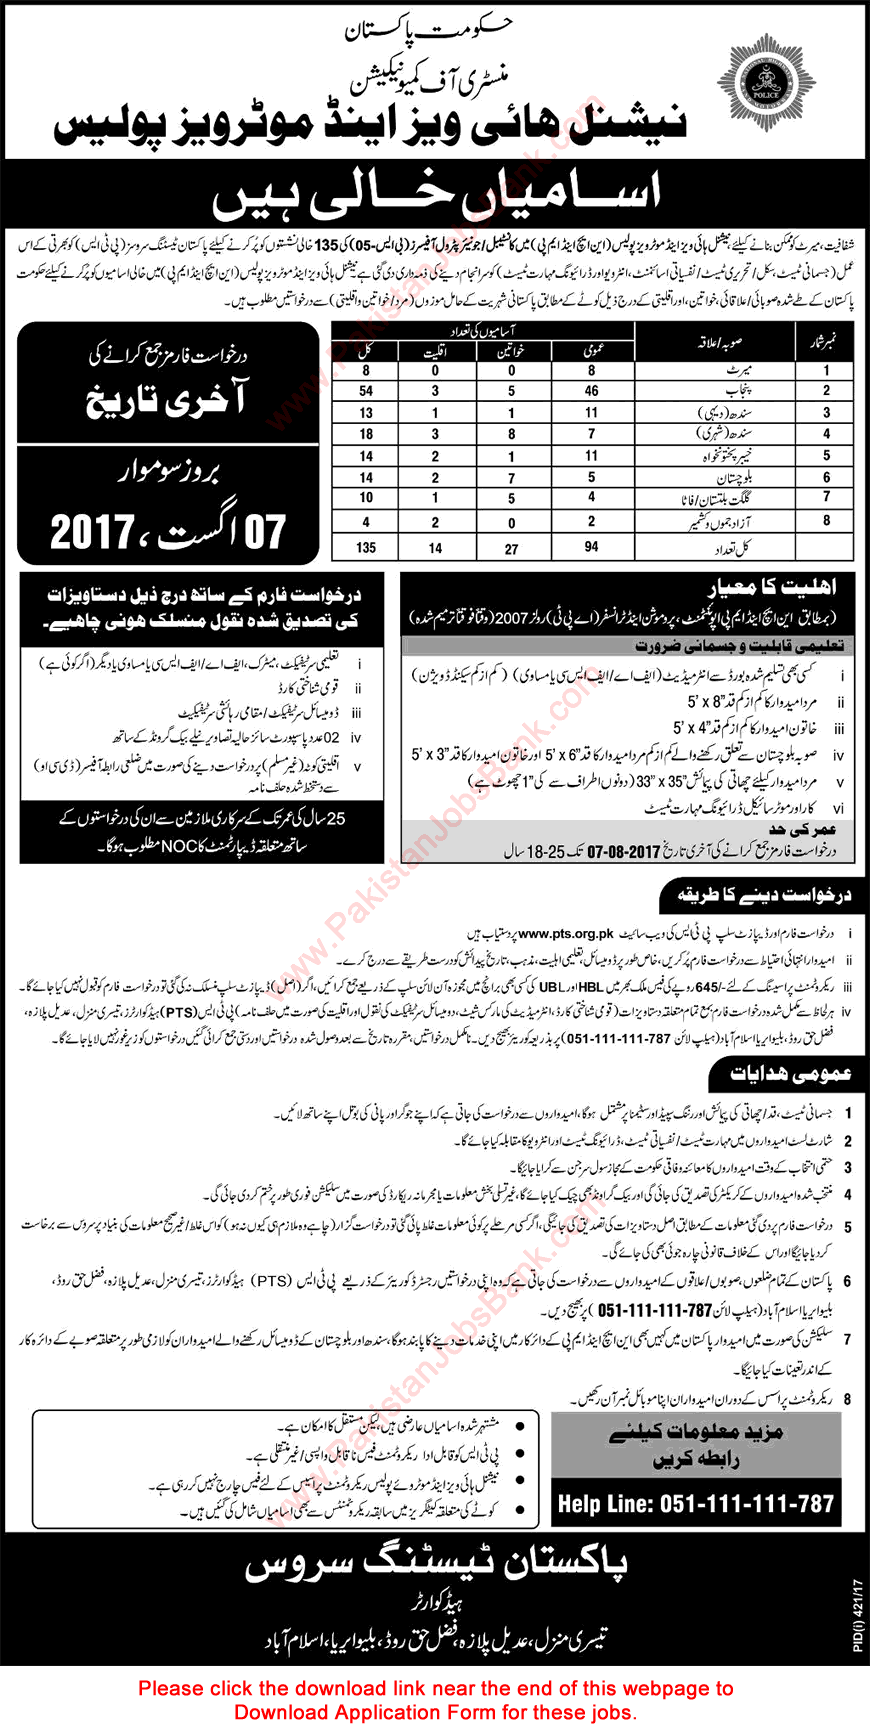 Constable / Junior Patrol Officer Jobs in Motorway Police July 2017 PTS Application Form NH&MP Latest